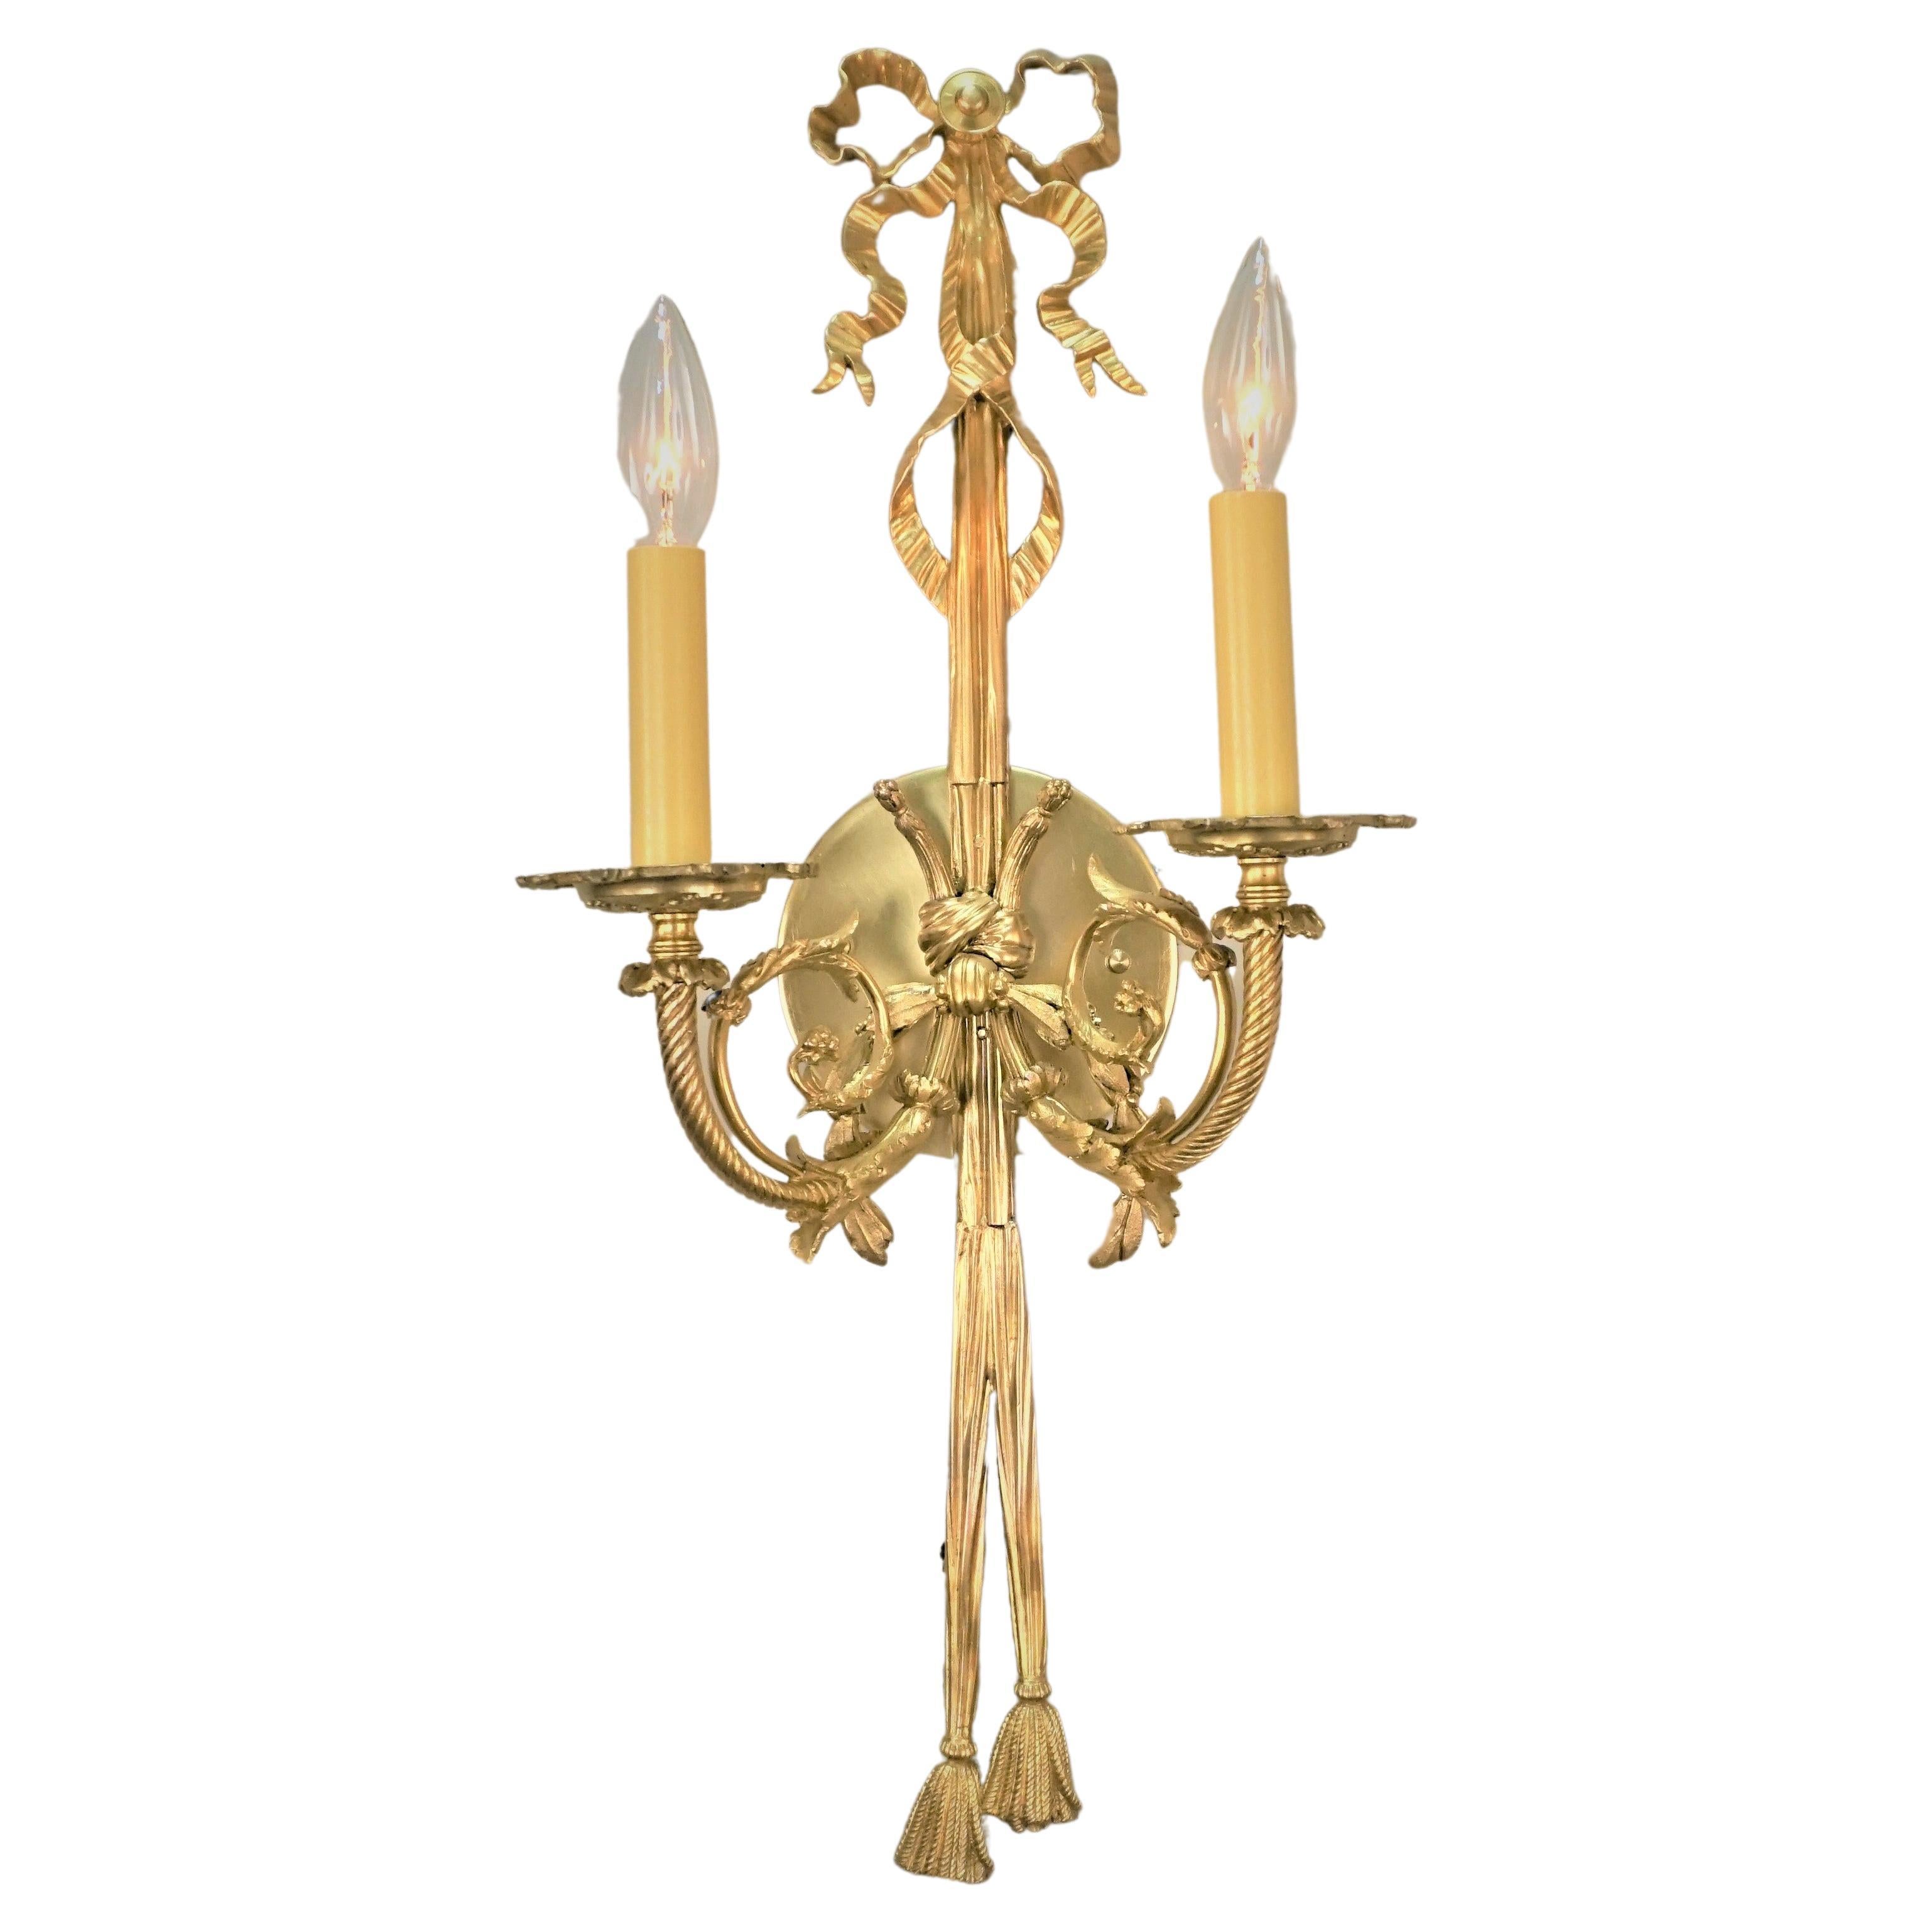 Early 20th Century Gilt Bronze Wall Sconces, 'Three Available'